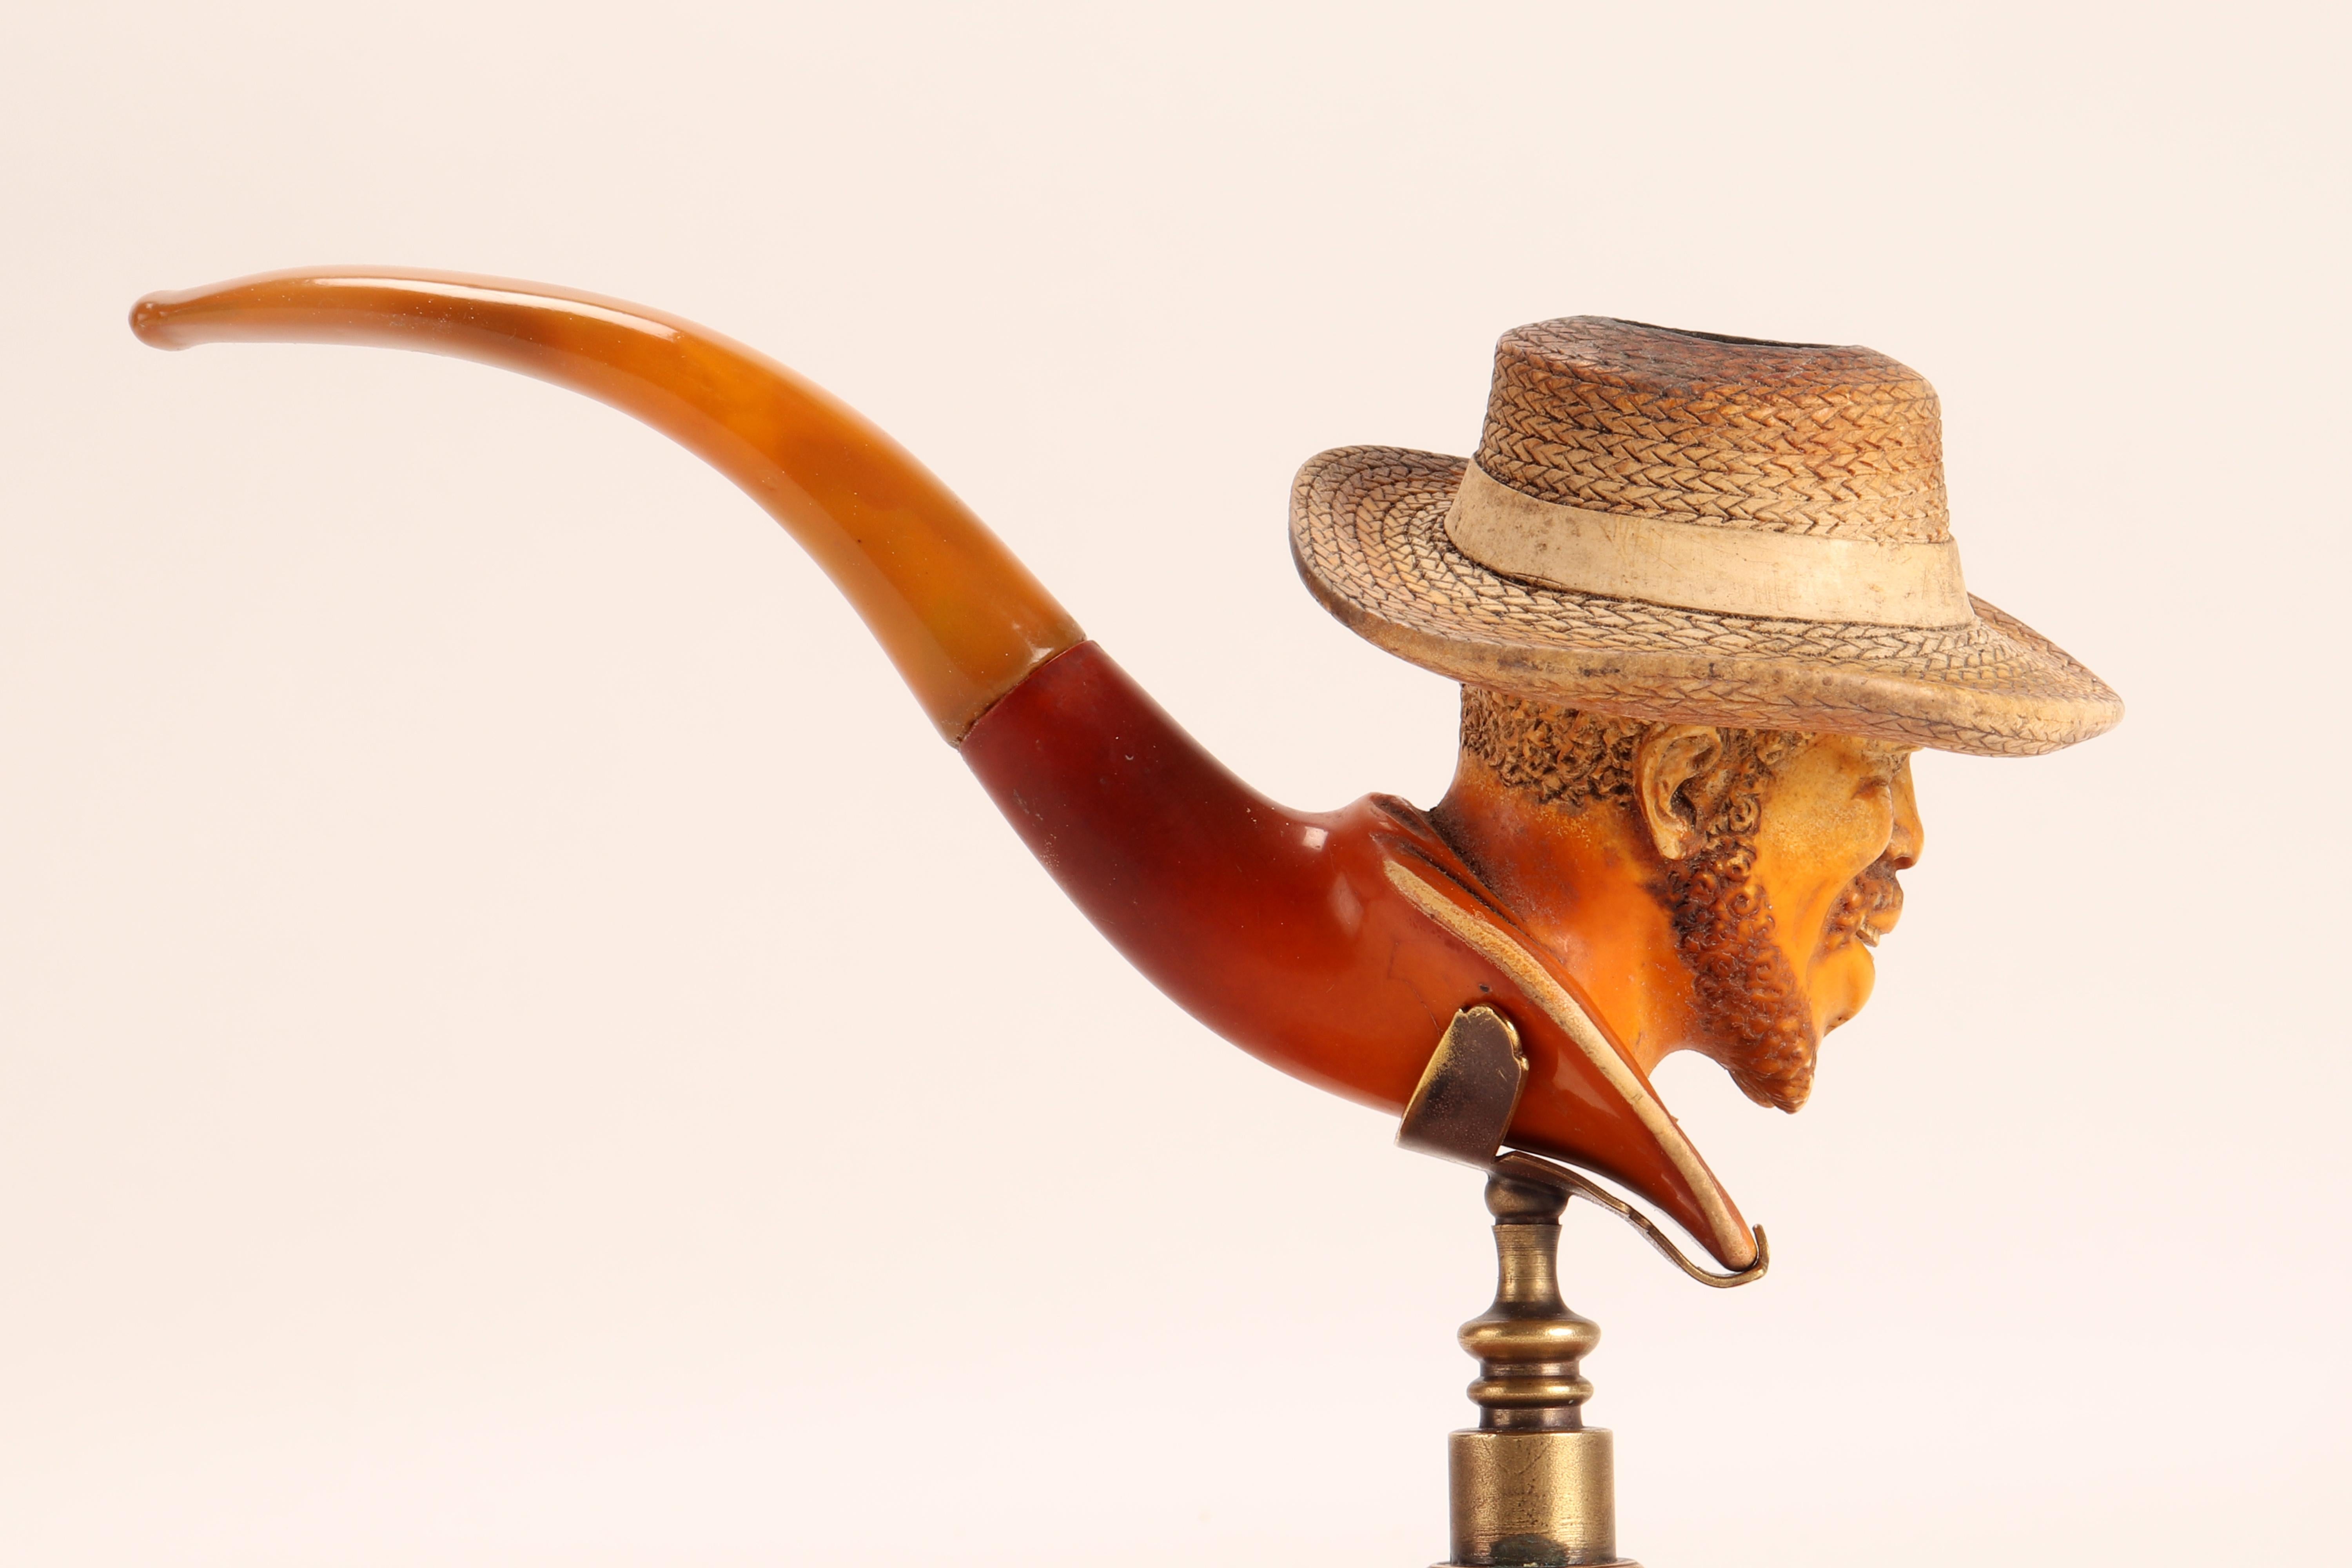 Carved meershaum pipe, with amber mouthpiece. In the large bowl of the pipe, the head of an African American smiling man is depicted, with a straw hat. Original case. Vienna, Austria circa 1880. (The stand is for photographic use only, not for sale).